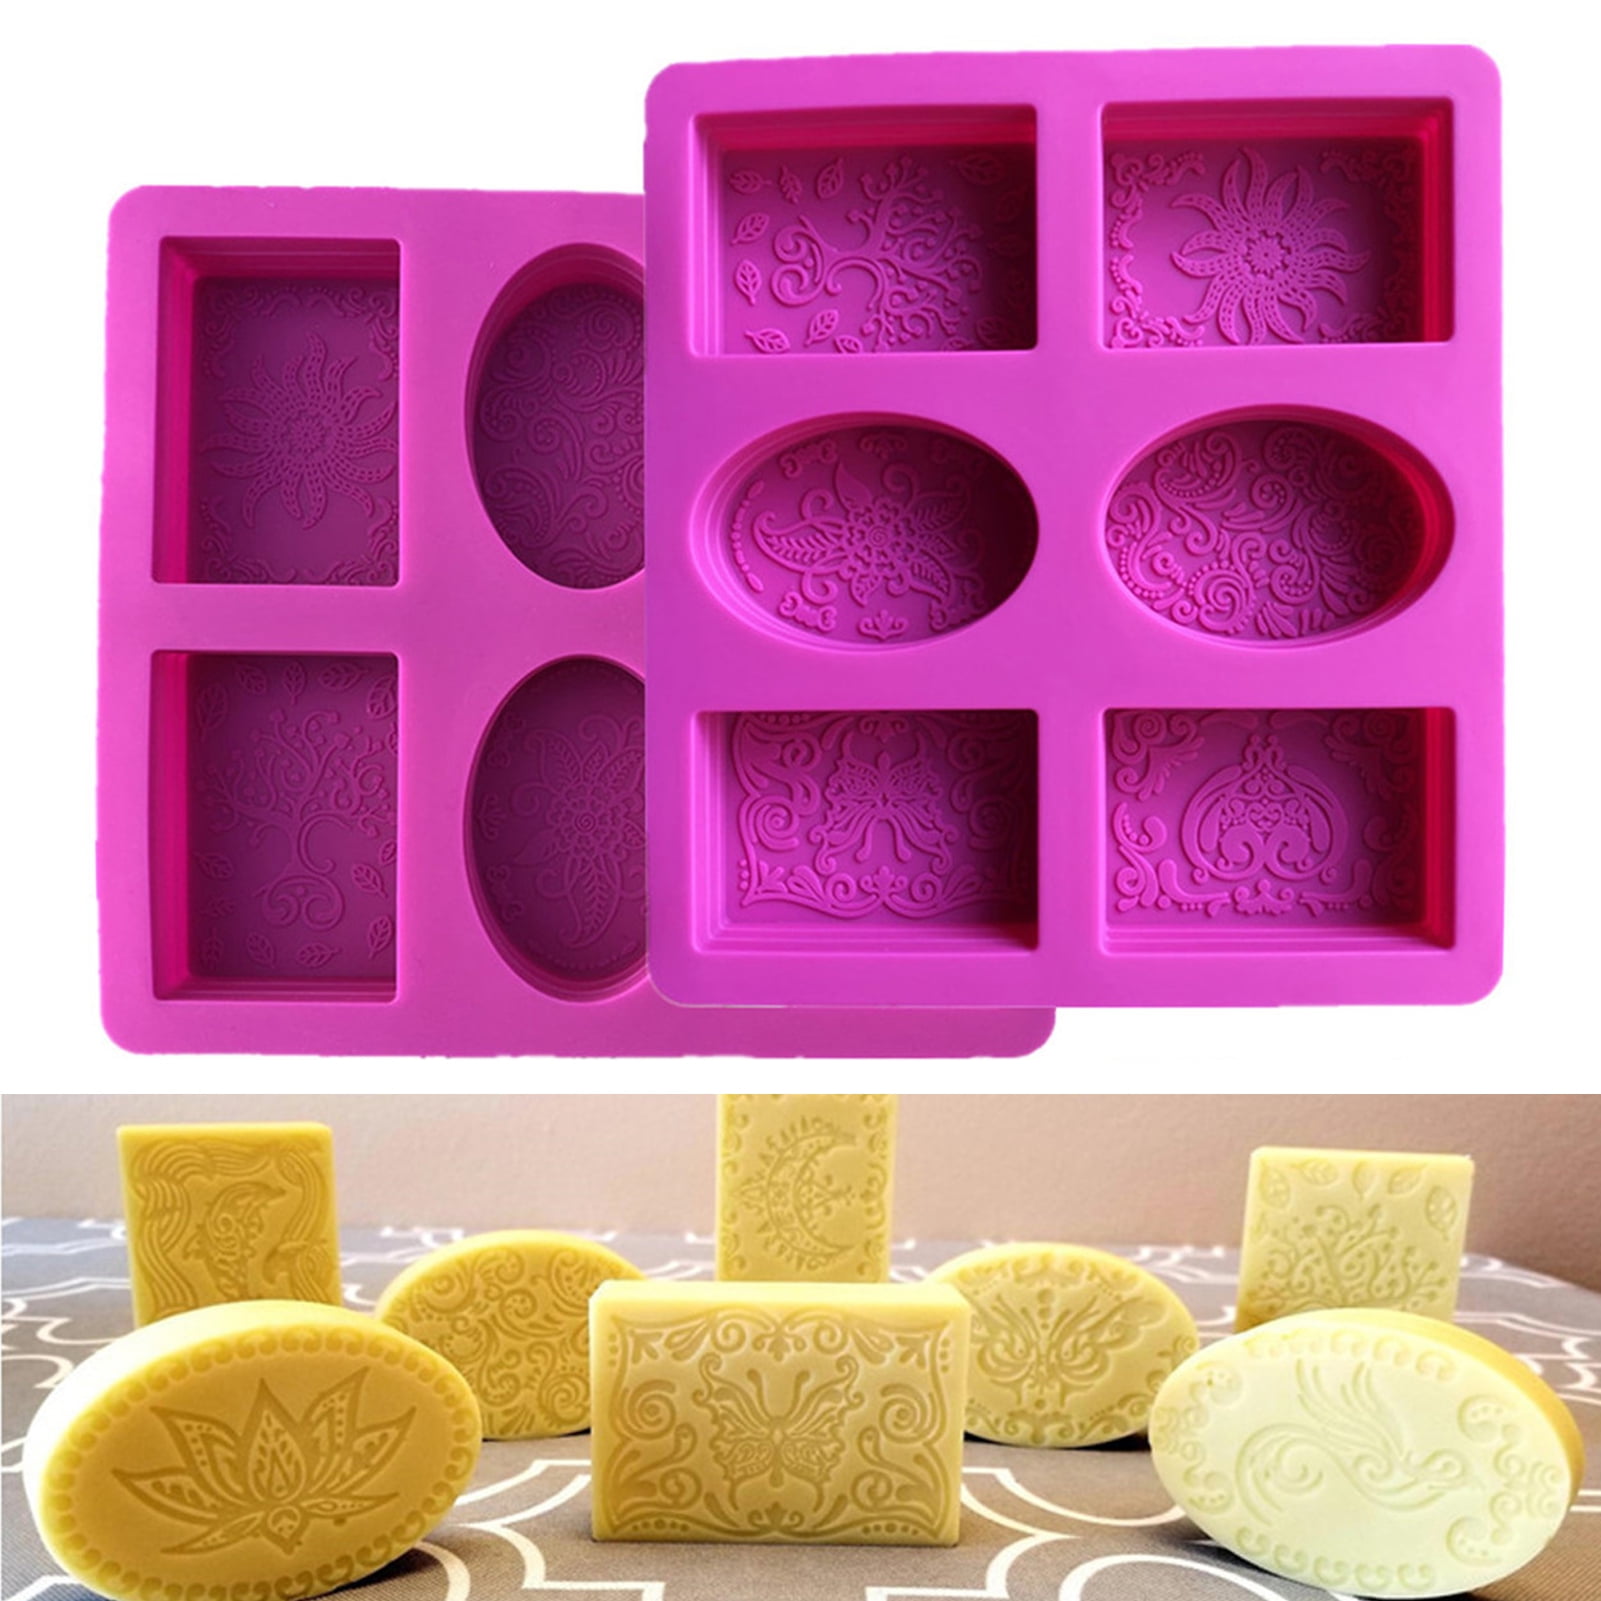 6 cell LARGE PAW Silicone Soap Mould Craft Plaster of Paris fragrance candle wax 